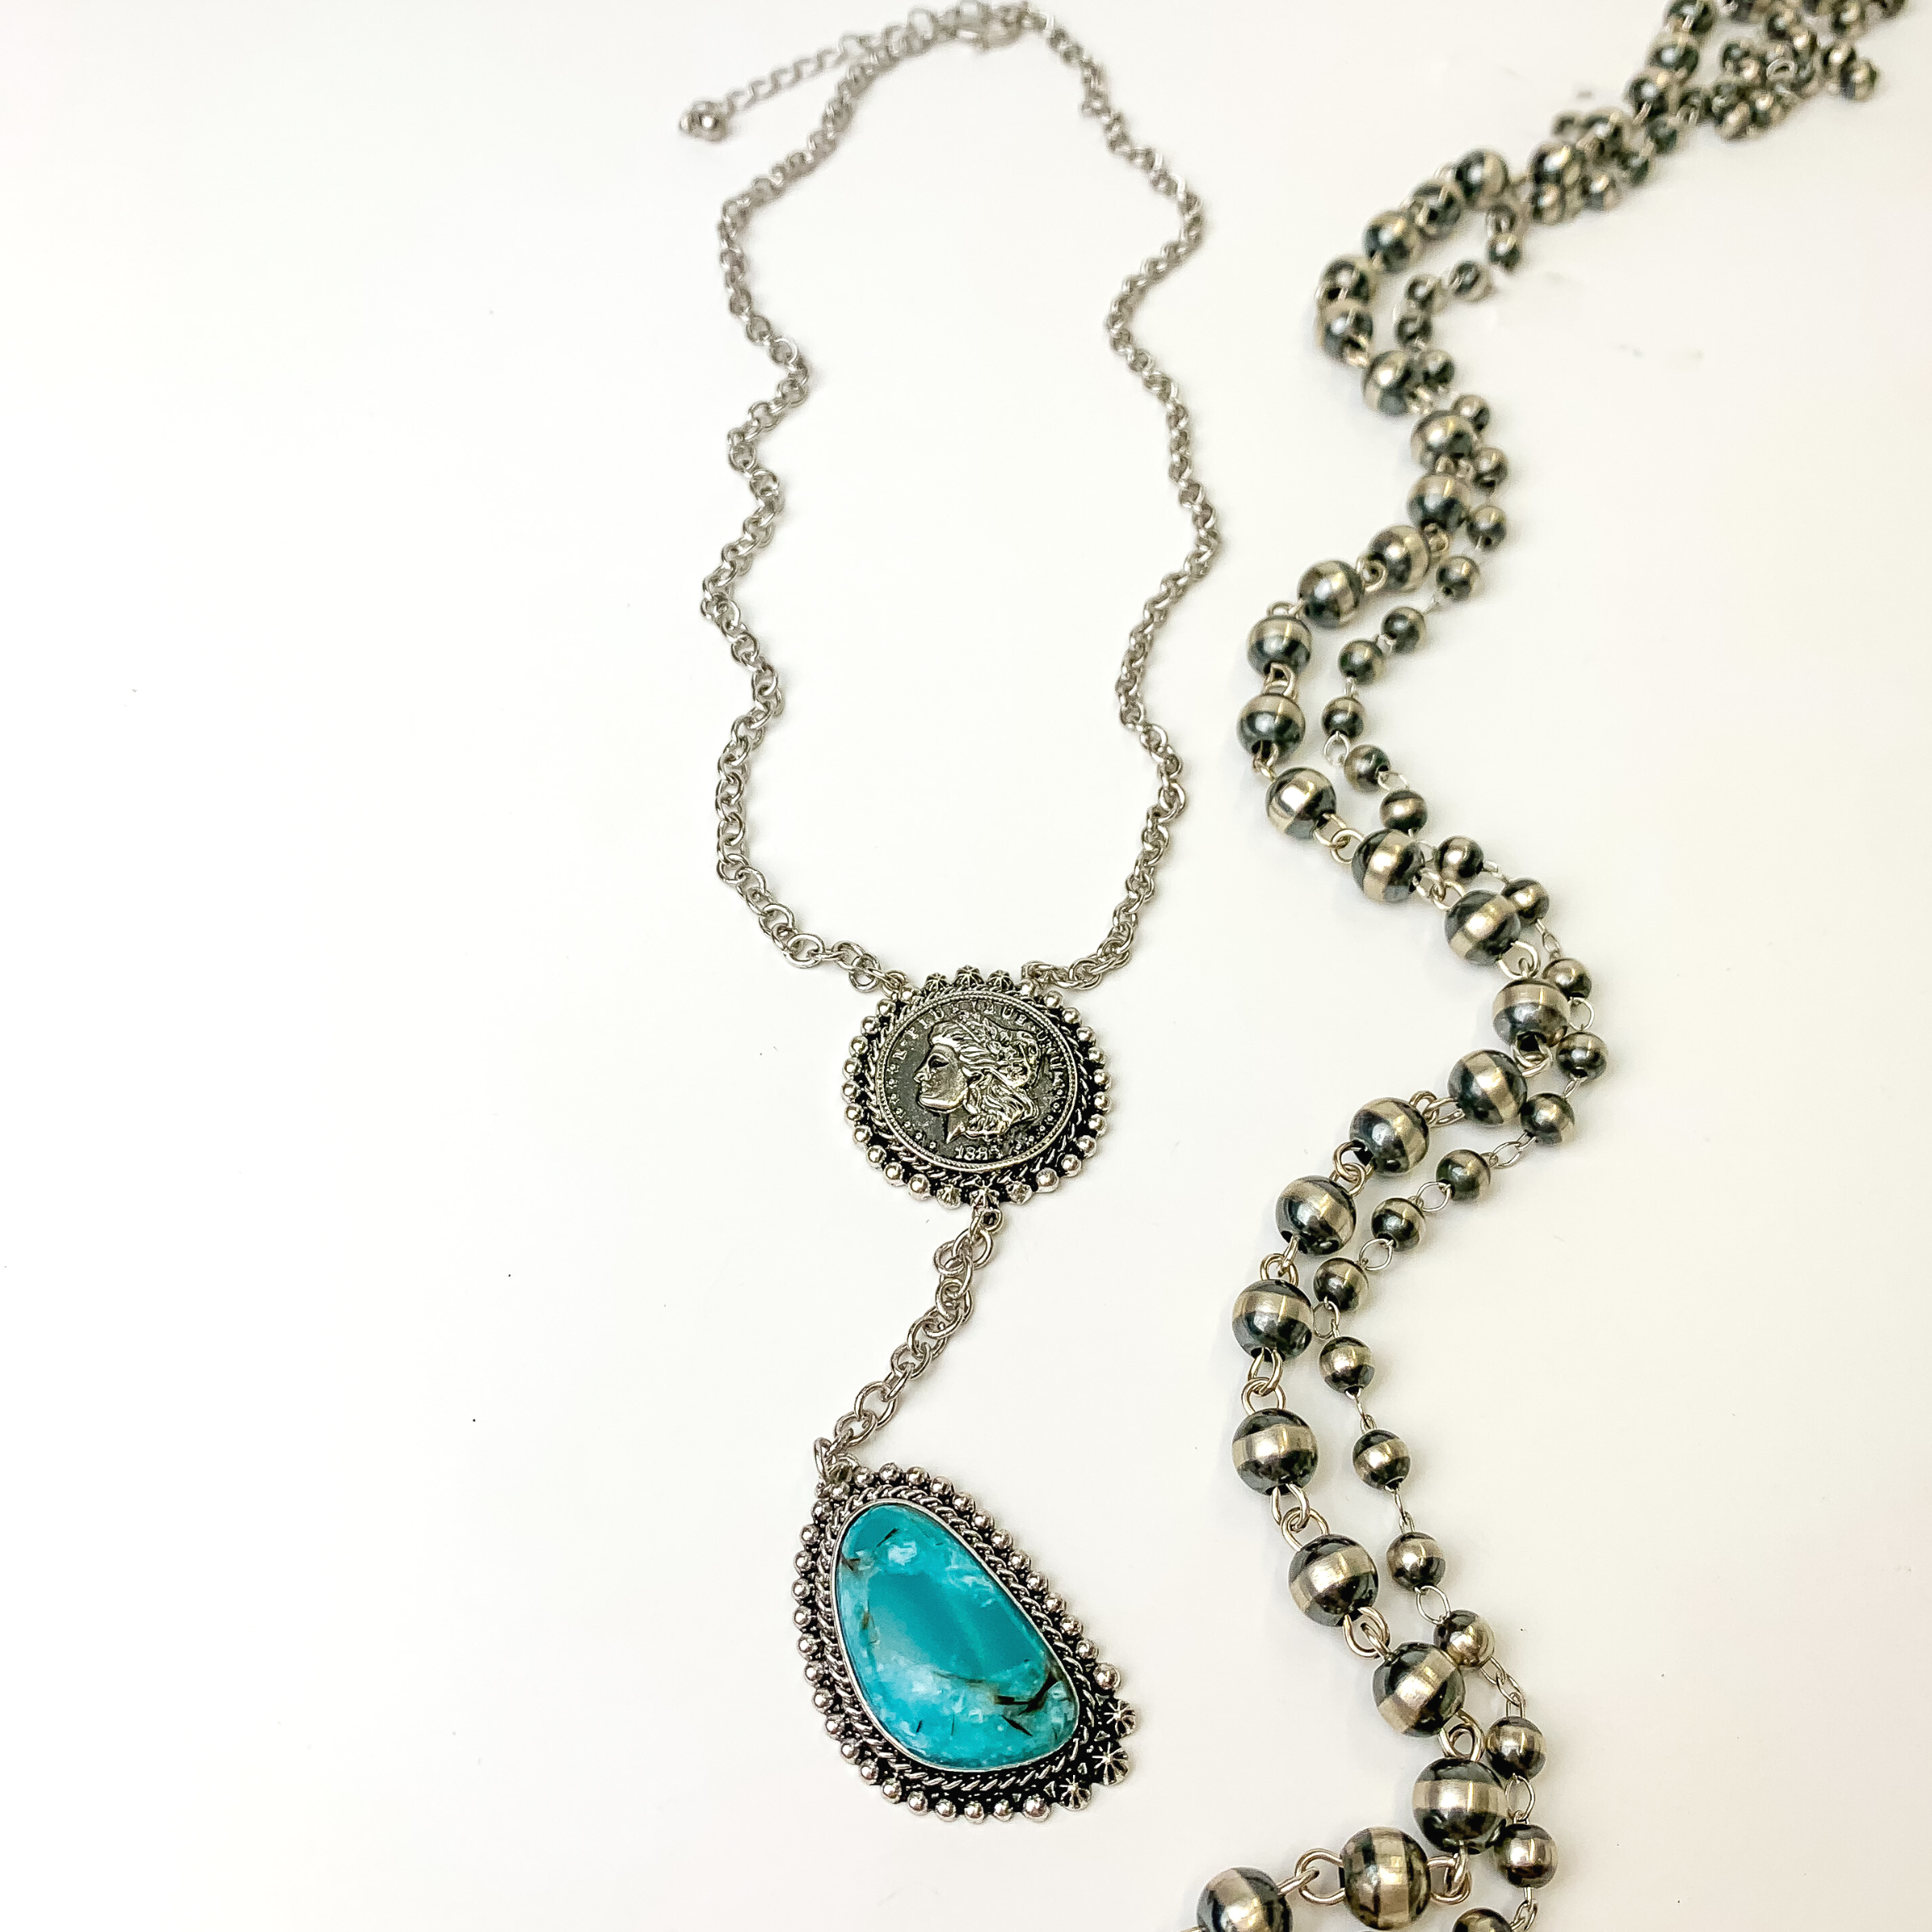 Silver Tone Lariat Necklace with Silver Tone Coin and Faux Turquoise Stone Drop - Giddy Up Glamour Boutique